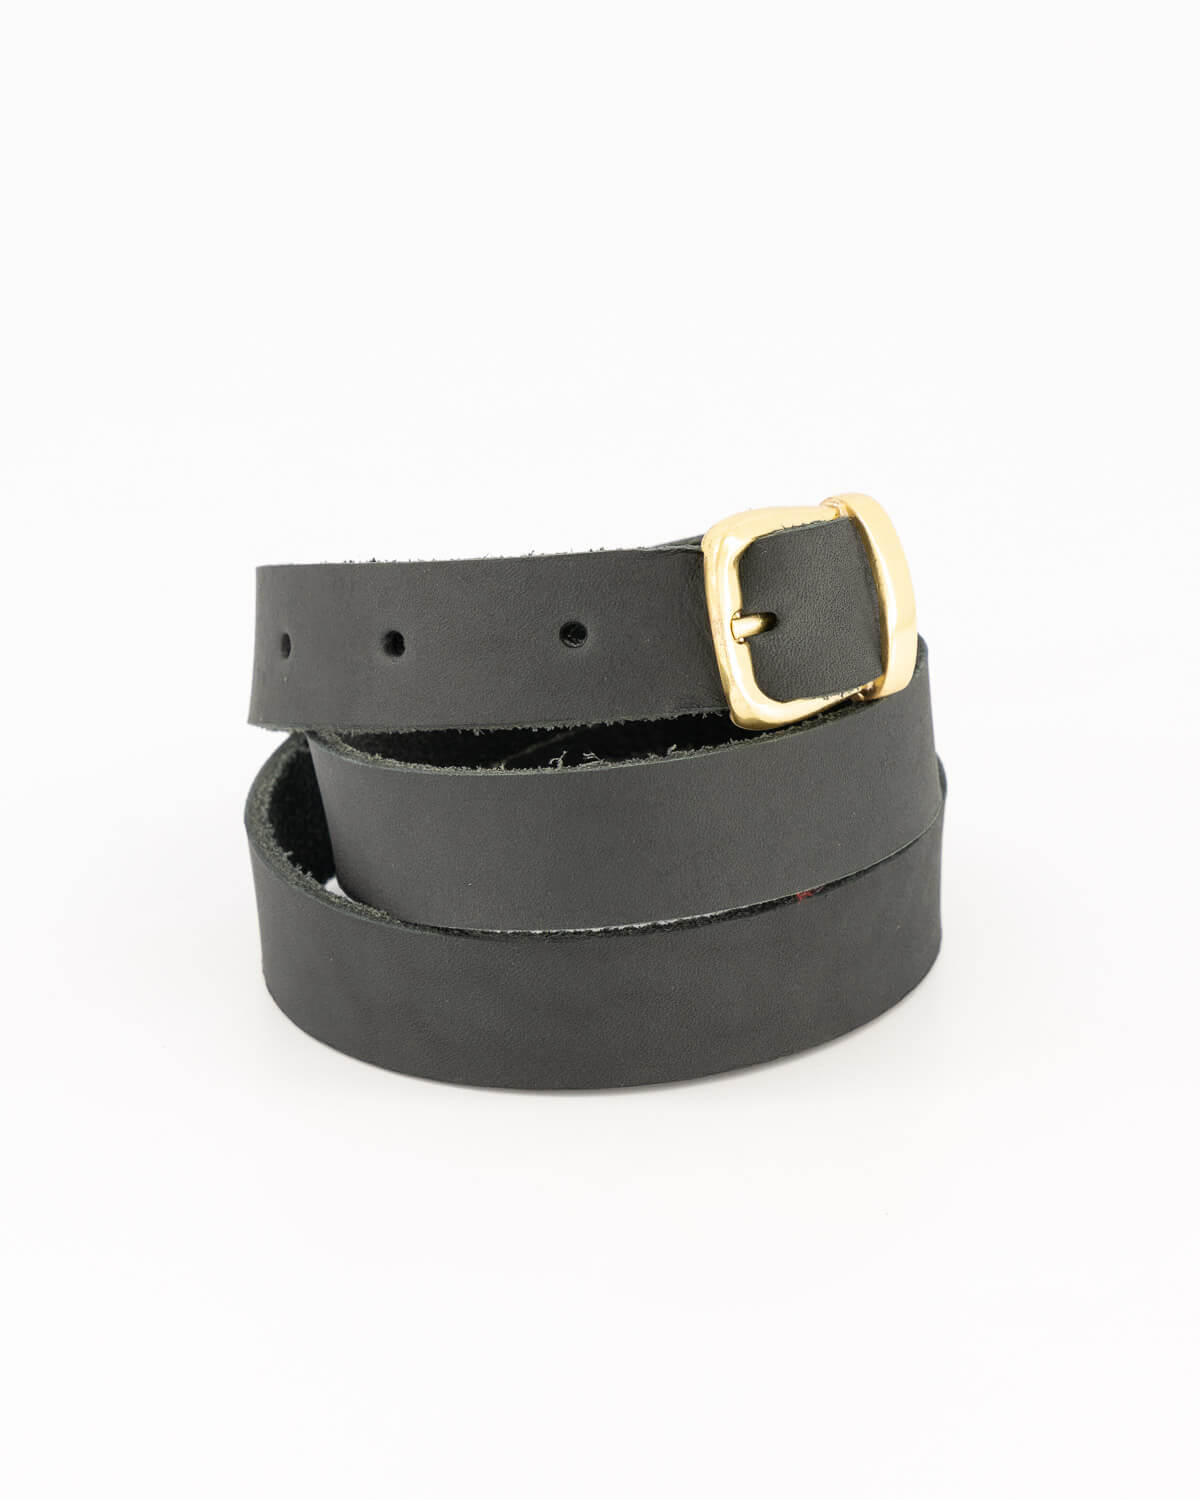 Black leather waist belt with gold buckle detail 